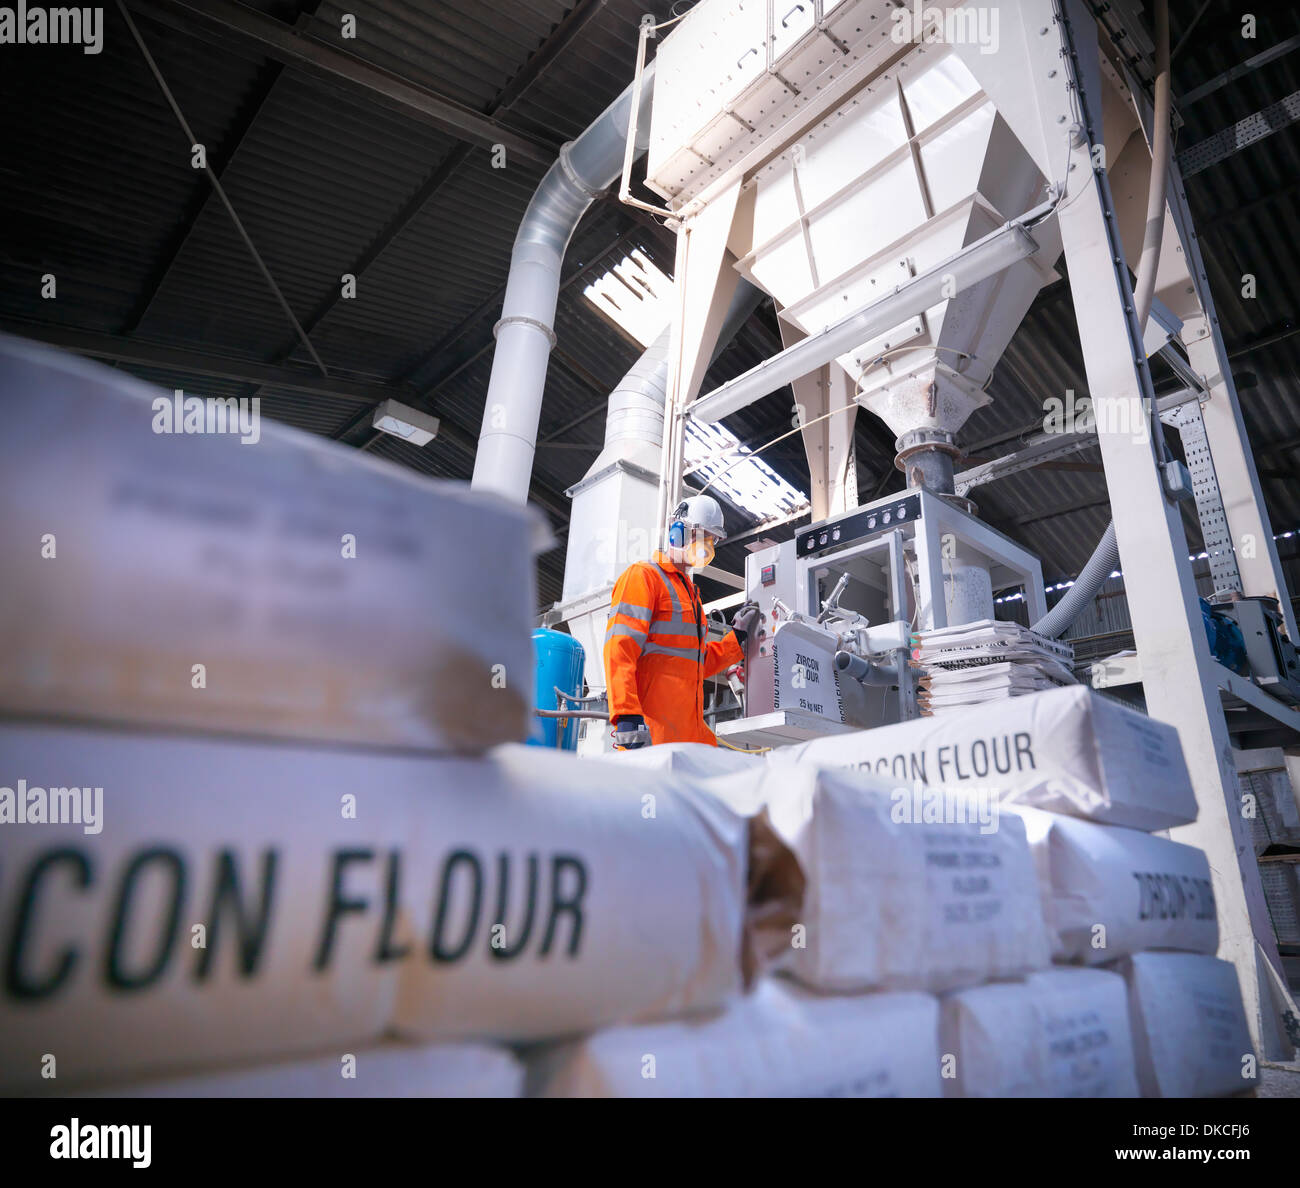 Worker in protective clothing filling zircon flour bags in mill, low angle view Stock Photo